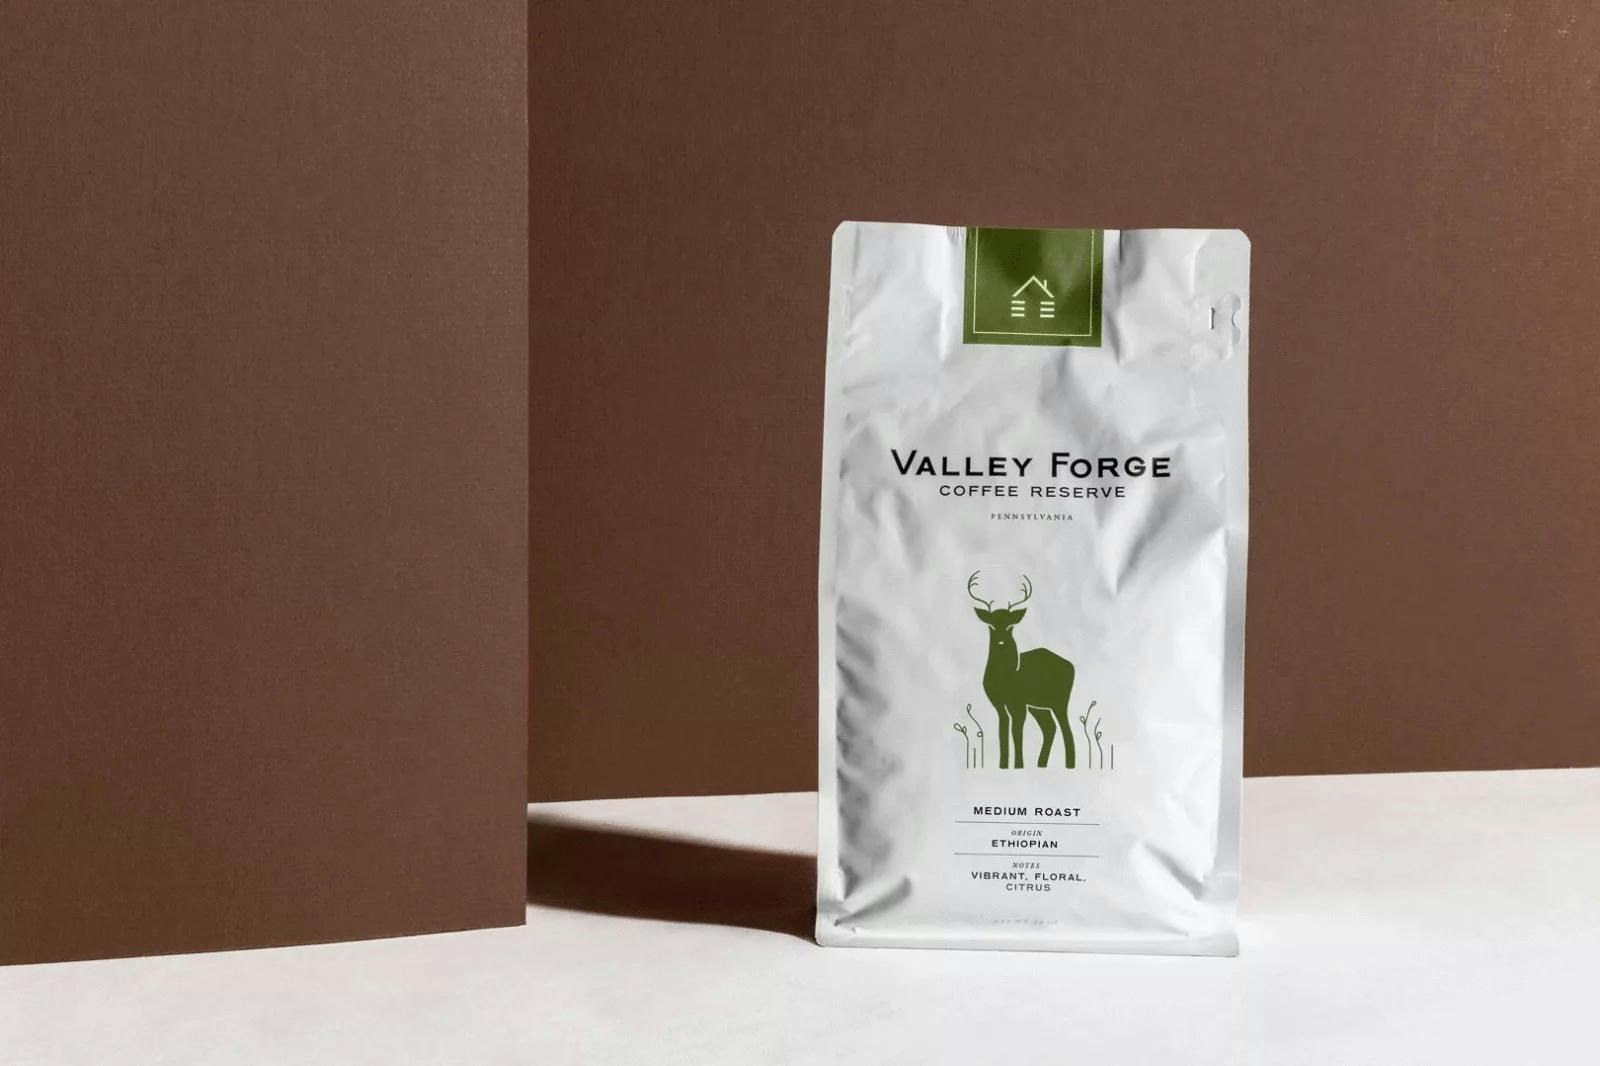 Valley Forge Coffee Reserve Packaging featured image